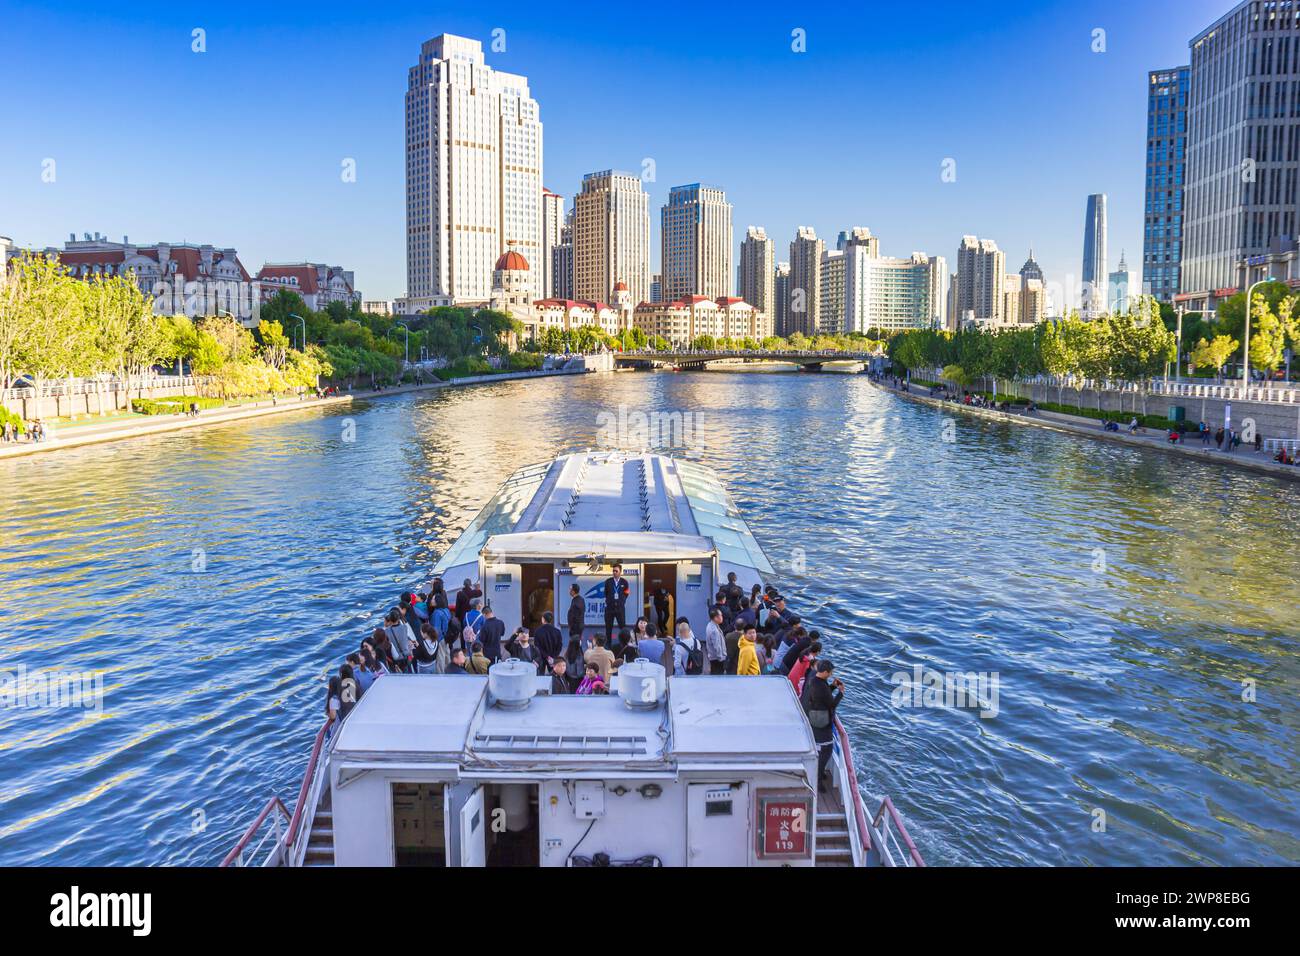 People enjoying a river cruise on the Hai river in Tianjin, China Stock Photo